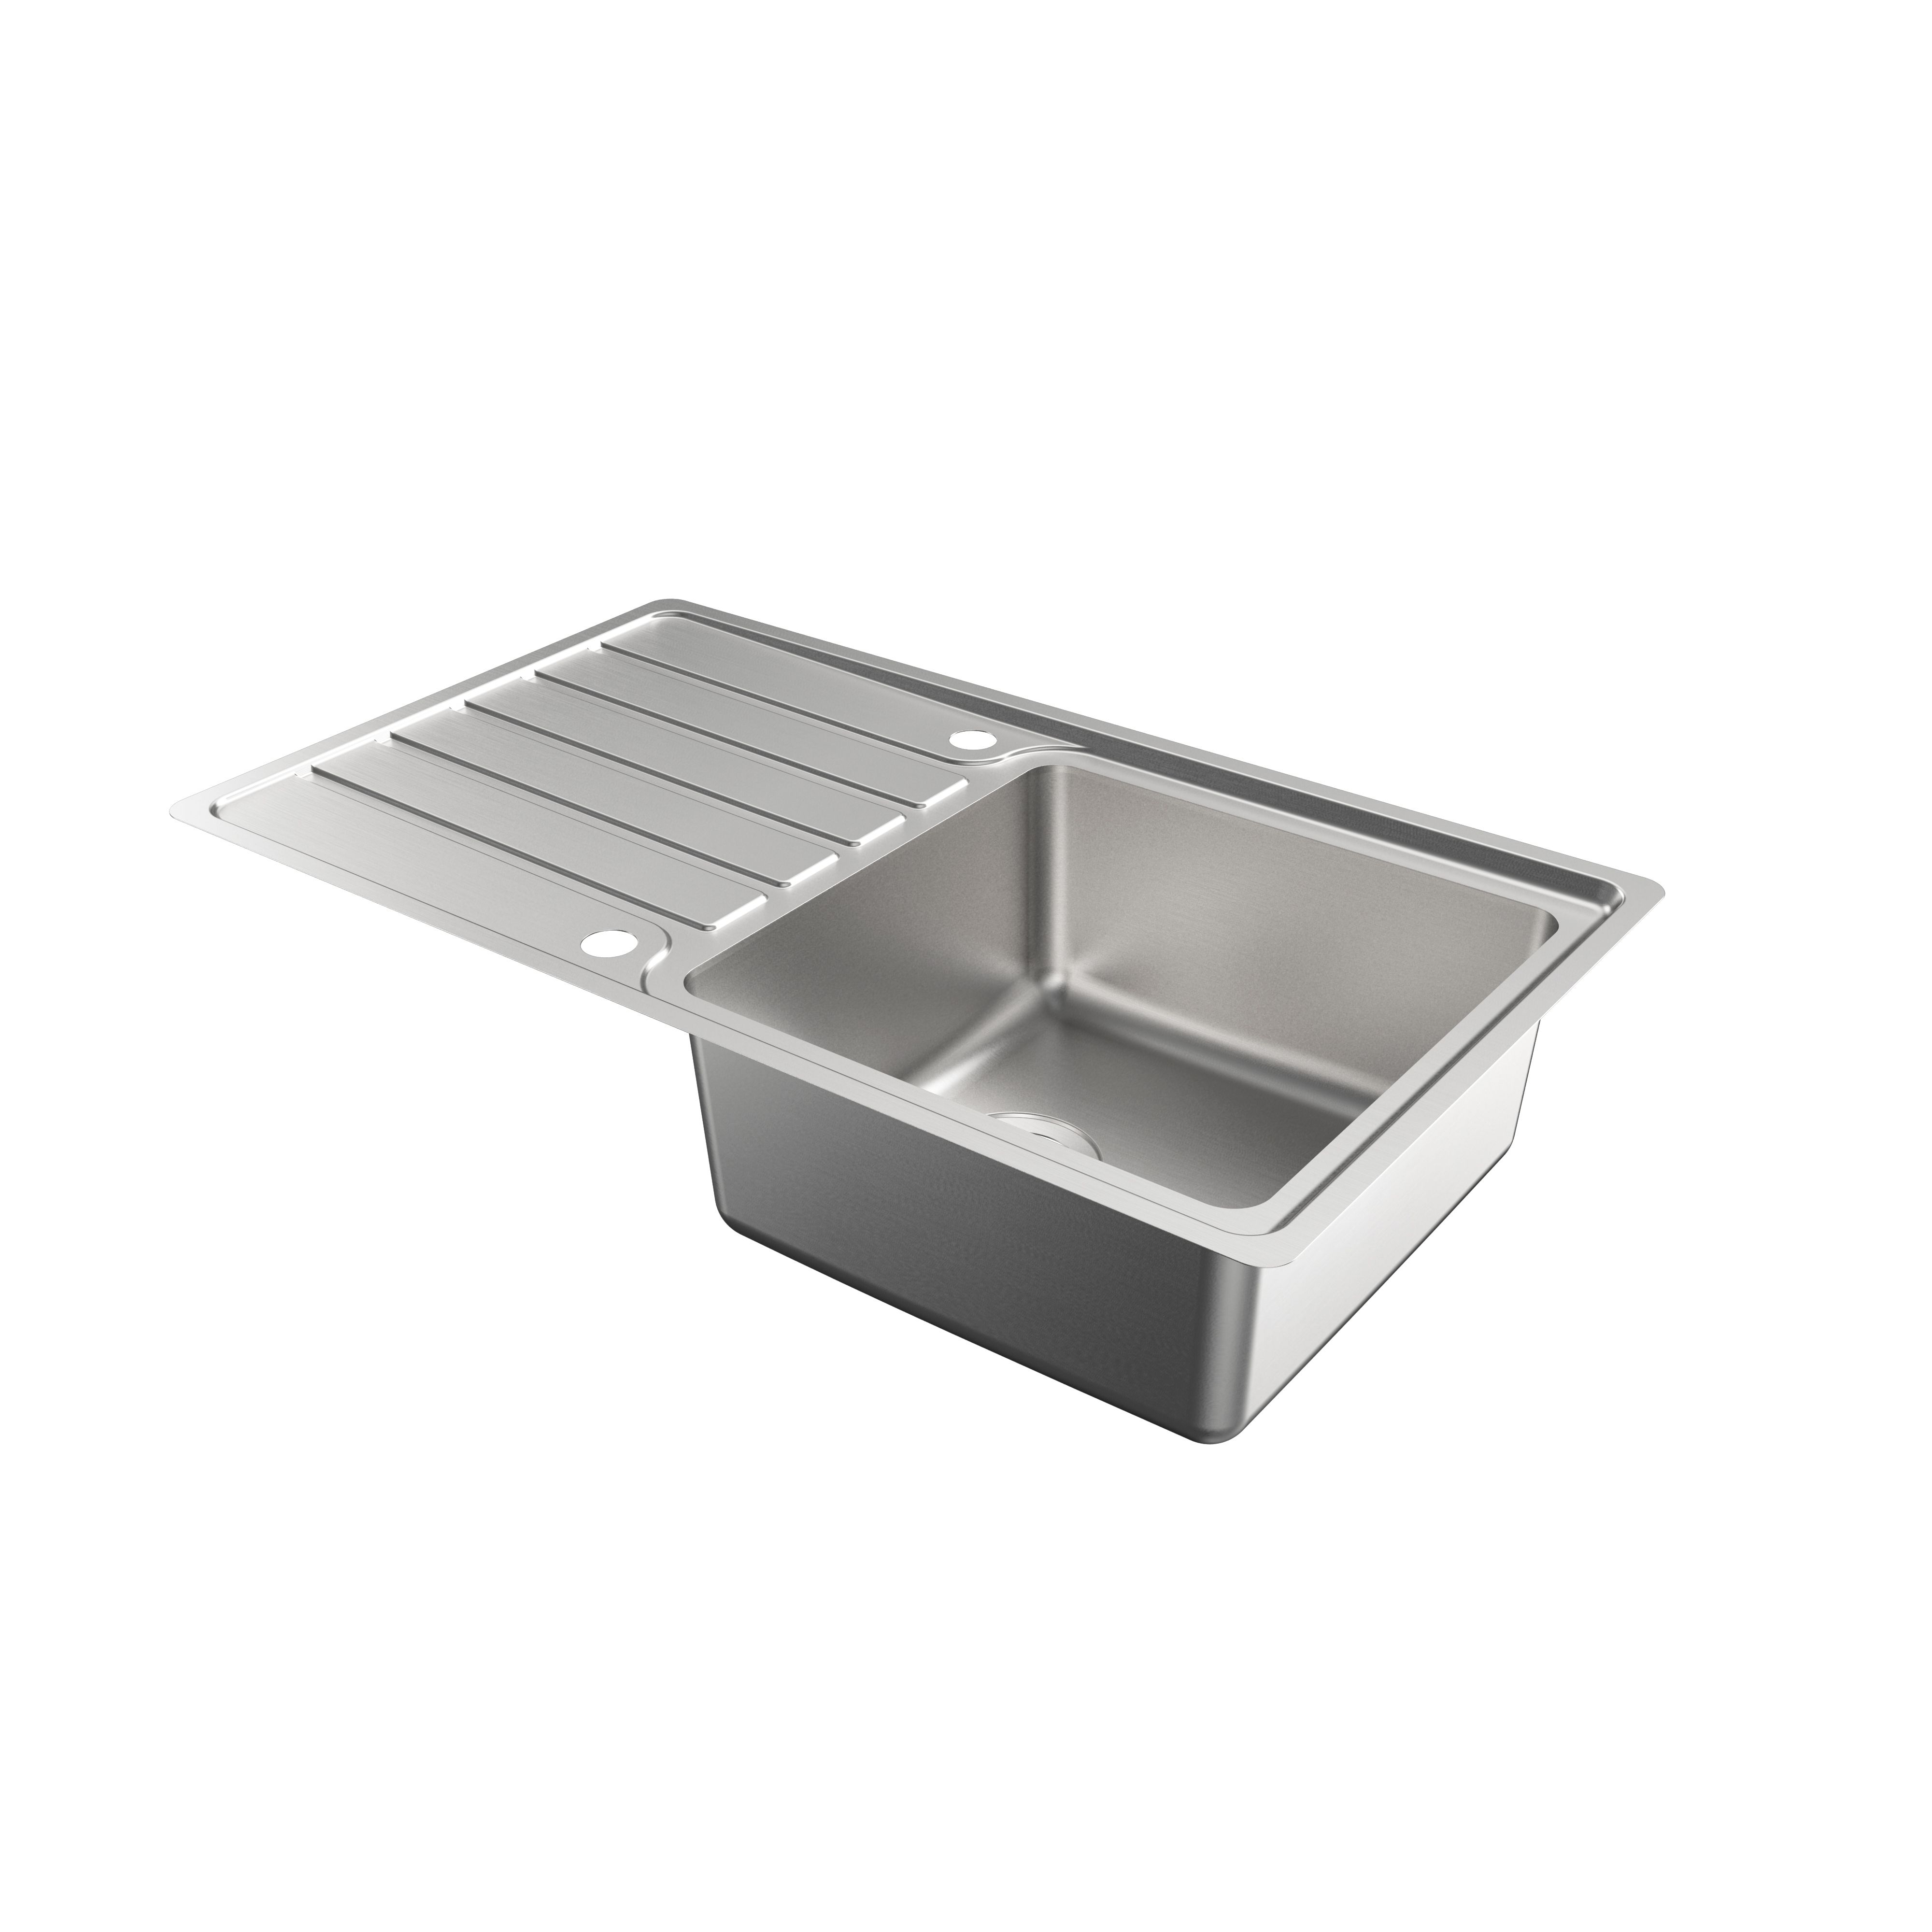 Cooke & Lewis Apollonia Brushed Silver Stainless steel 1 Bowl Sink & drainer 500mm x 864mm